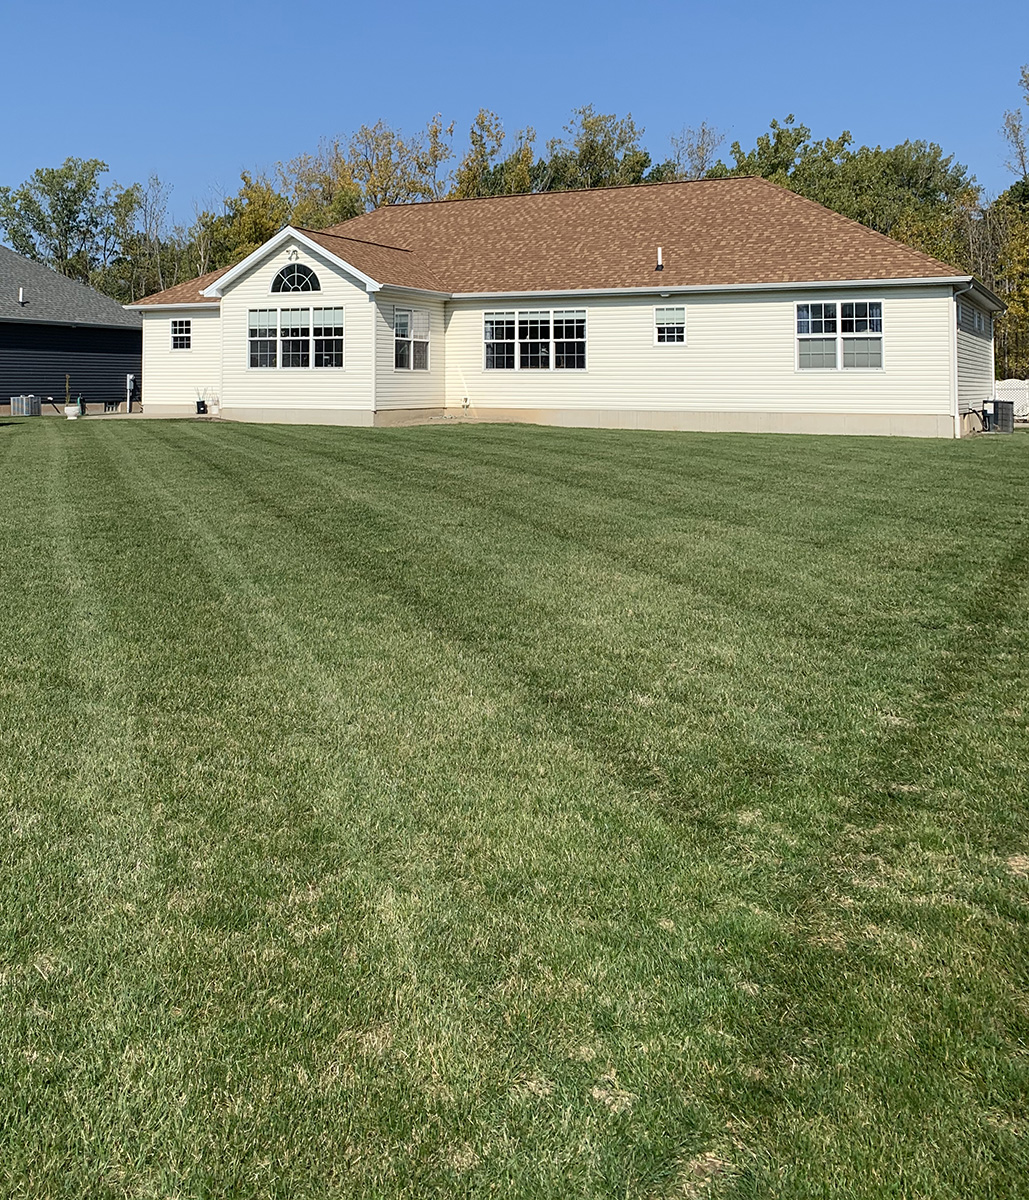 WNY Services, Grand Island lawn maintenance, Grand Island lawn mowing, lawn mowing, lawn care, Grand Island lawn care, commercial lawn mowing, residential lawn mowing